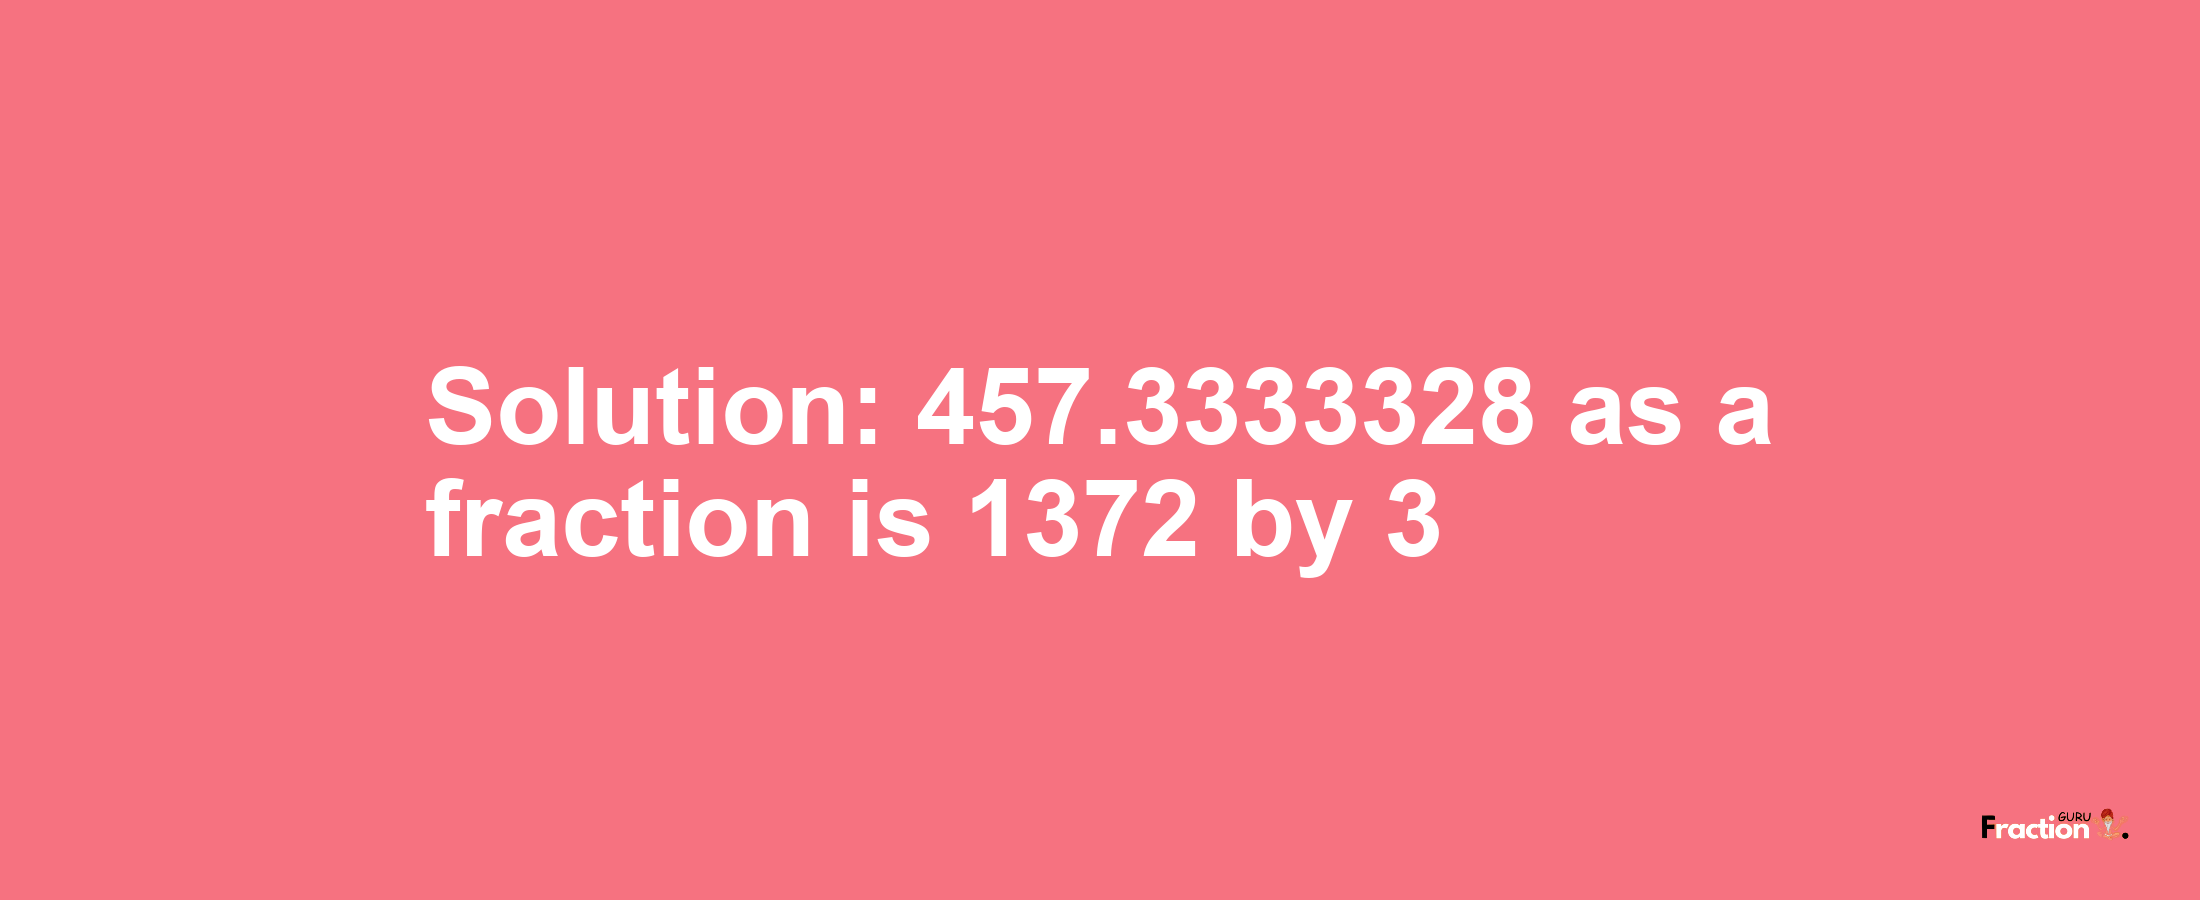 Solution:457.3333328 as a fraction is 1372/3